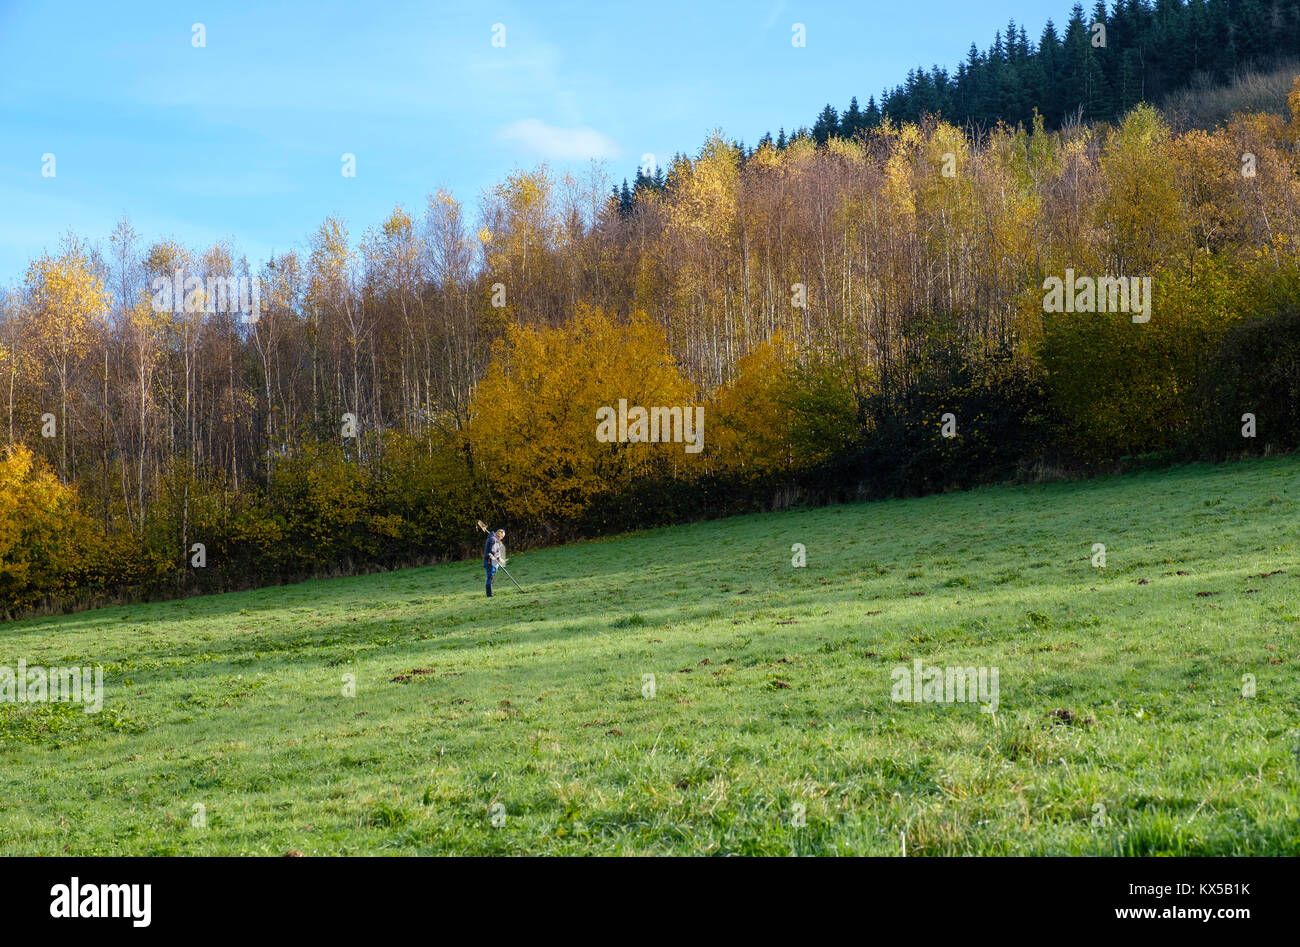 METAL DETECTING IN AUTUMN ON ARCHAEOLOGICAL SITE. Stock Photo